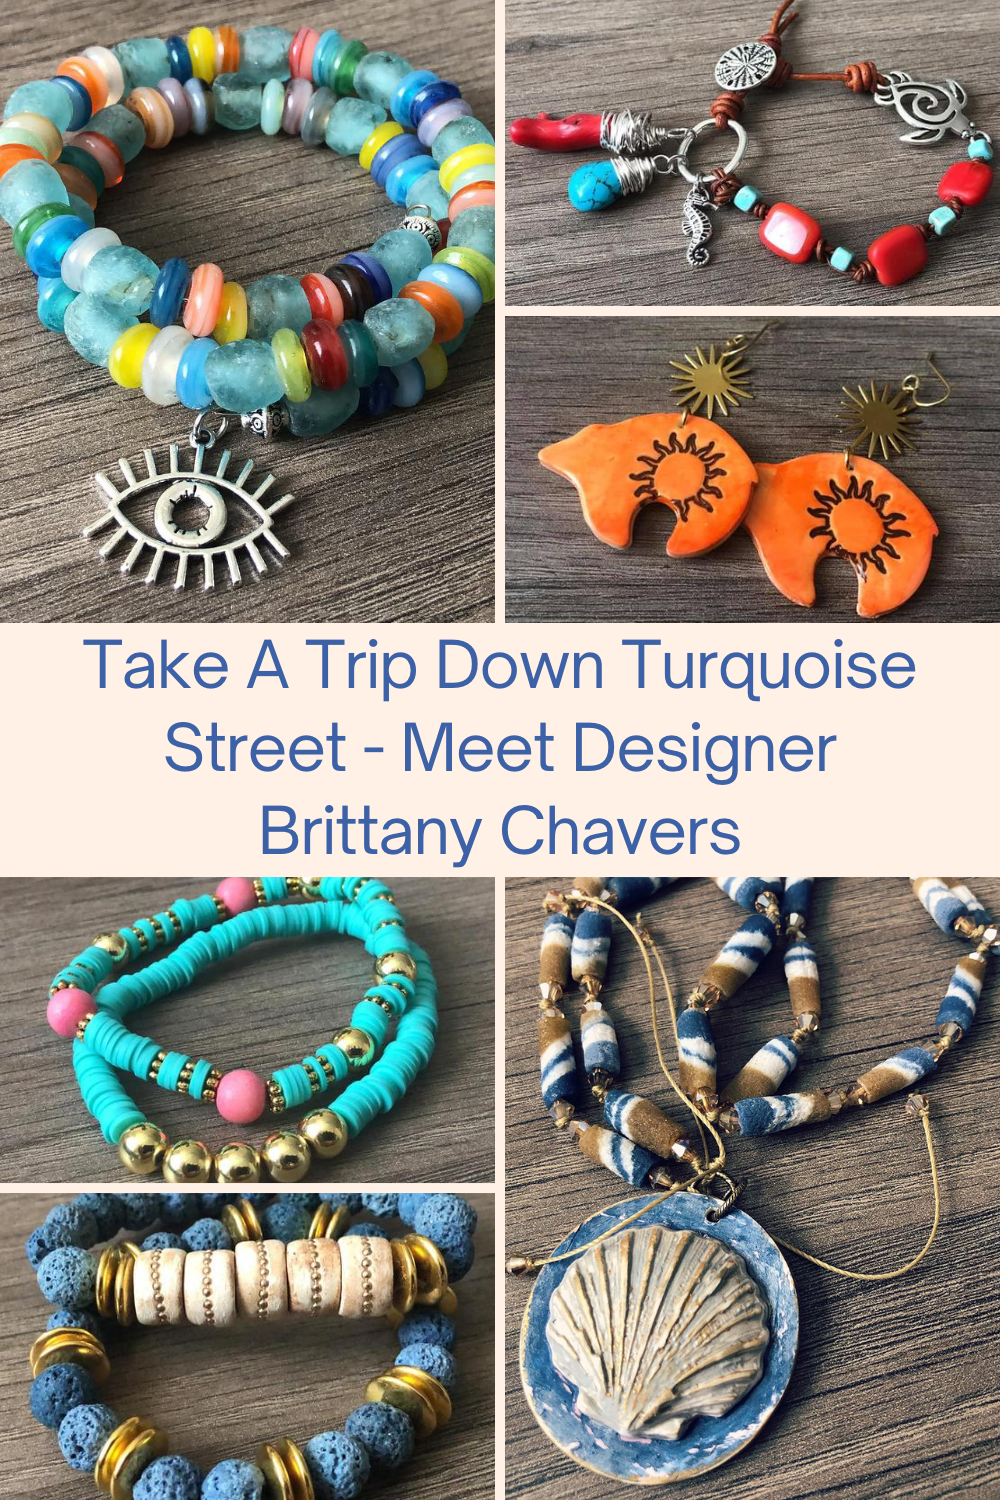 Take A Trip Down Turquoise Street - Meet Designer Brittany Chavers Collage